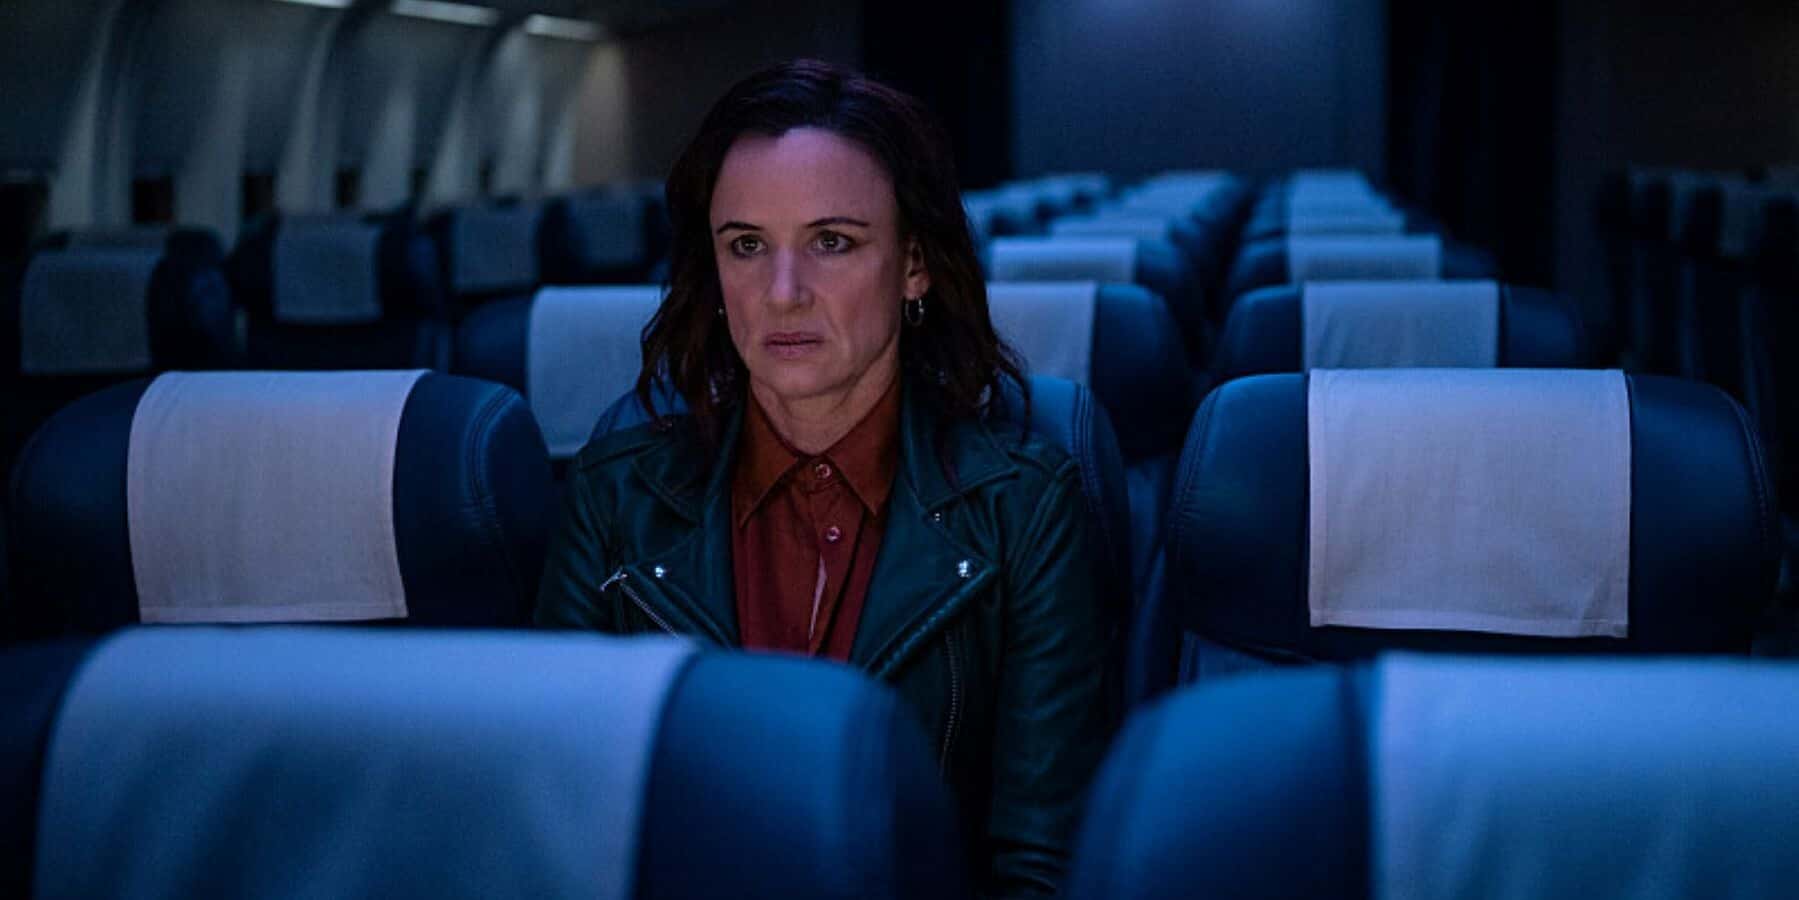 A woman sits on an empty airplane in this photo by Showtime Networks.